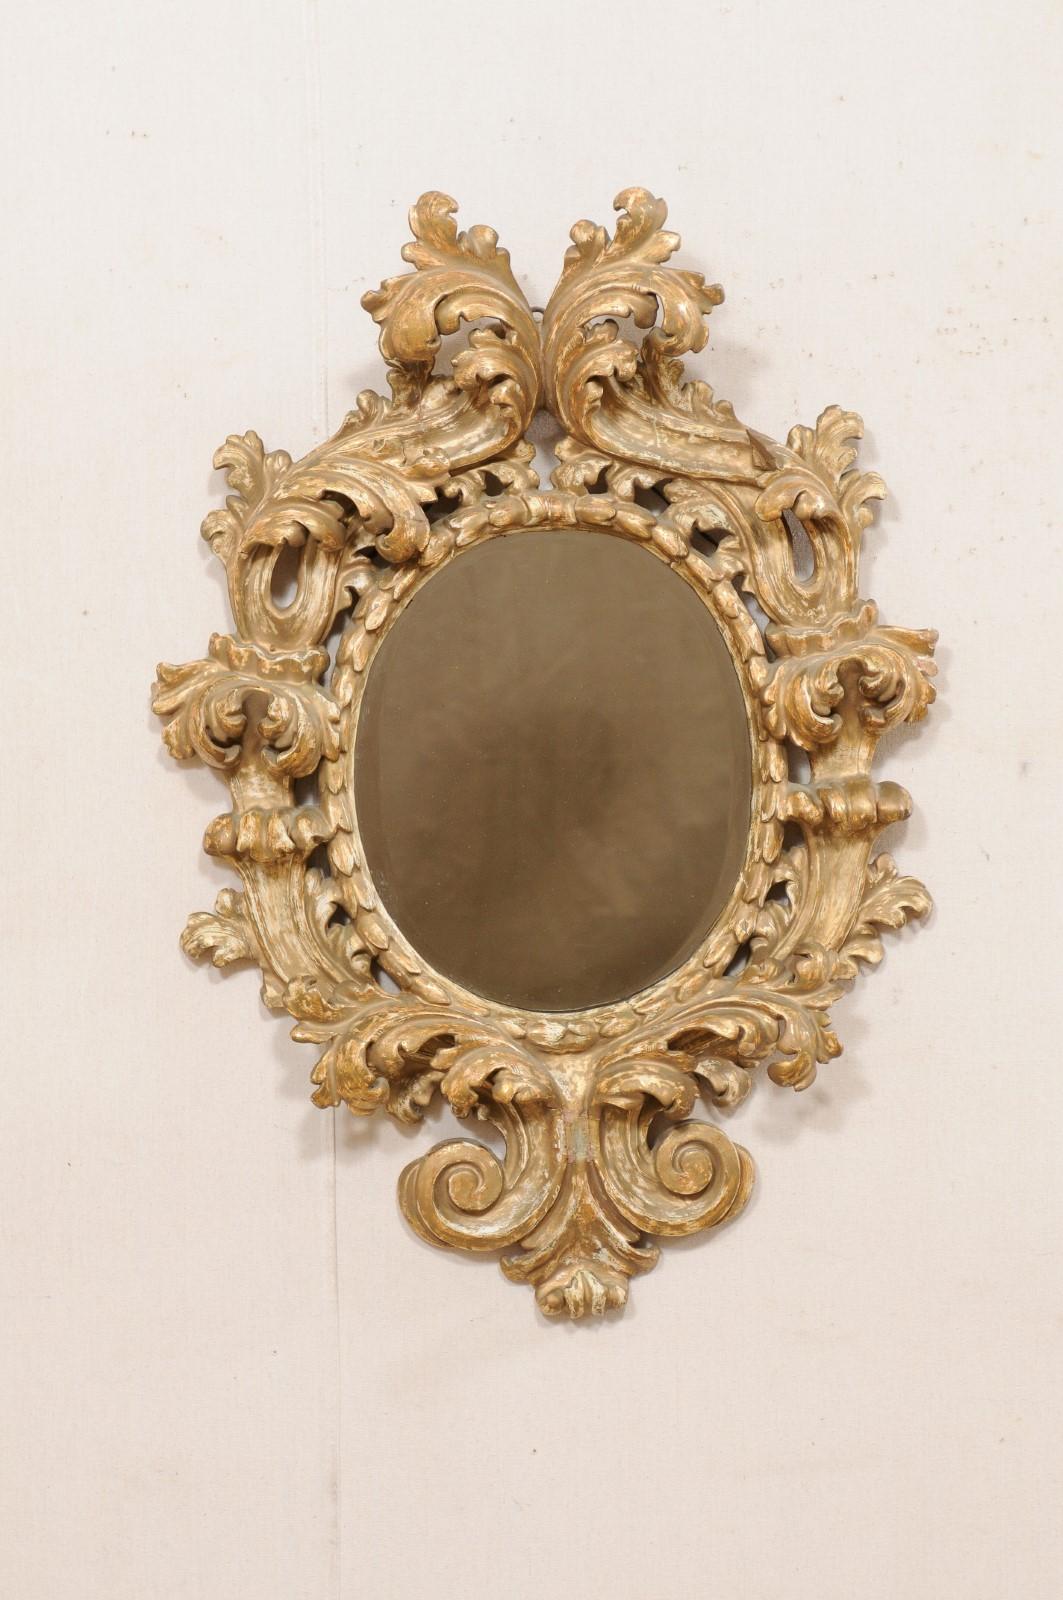 An Italian carved acanthus leaf mirror from the turn of the 18th and 19th century. This elaborate antique mirror from Italy features a richly carved, ornate acanthus leaf wooden surround with oblong, oval shaped glass at center. The carved details